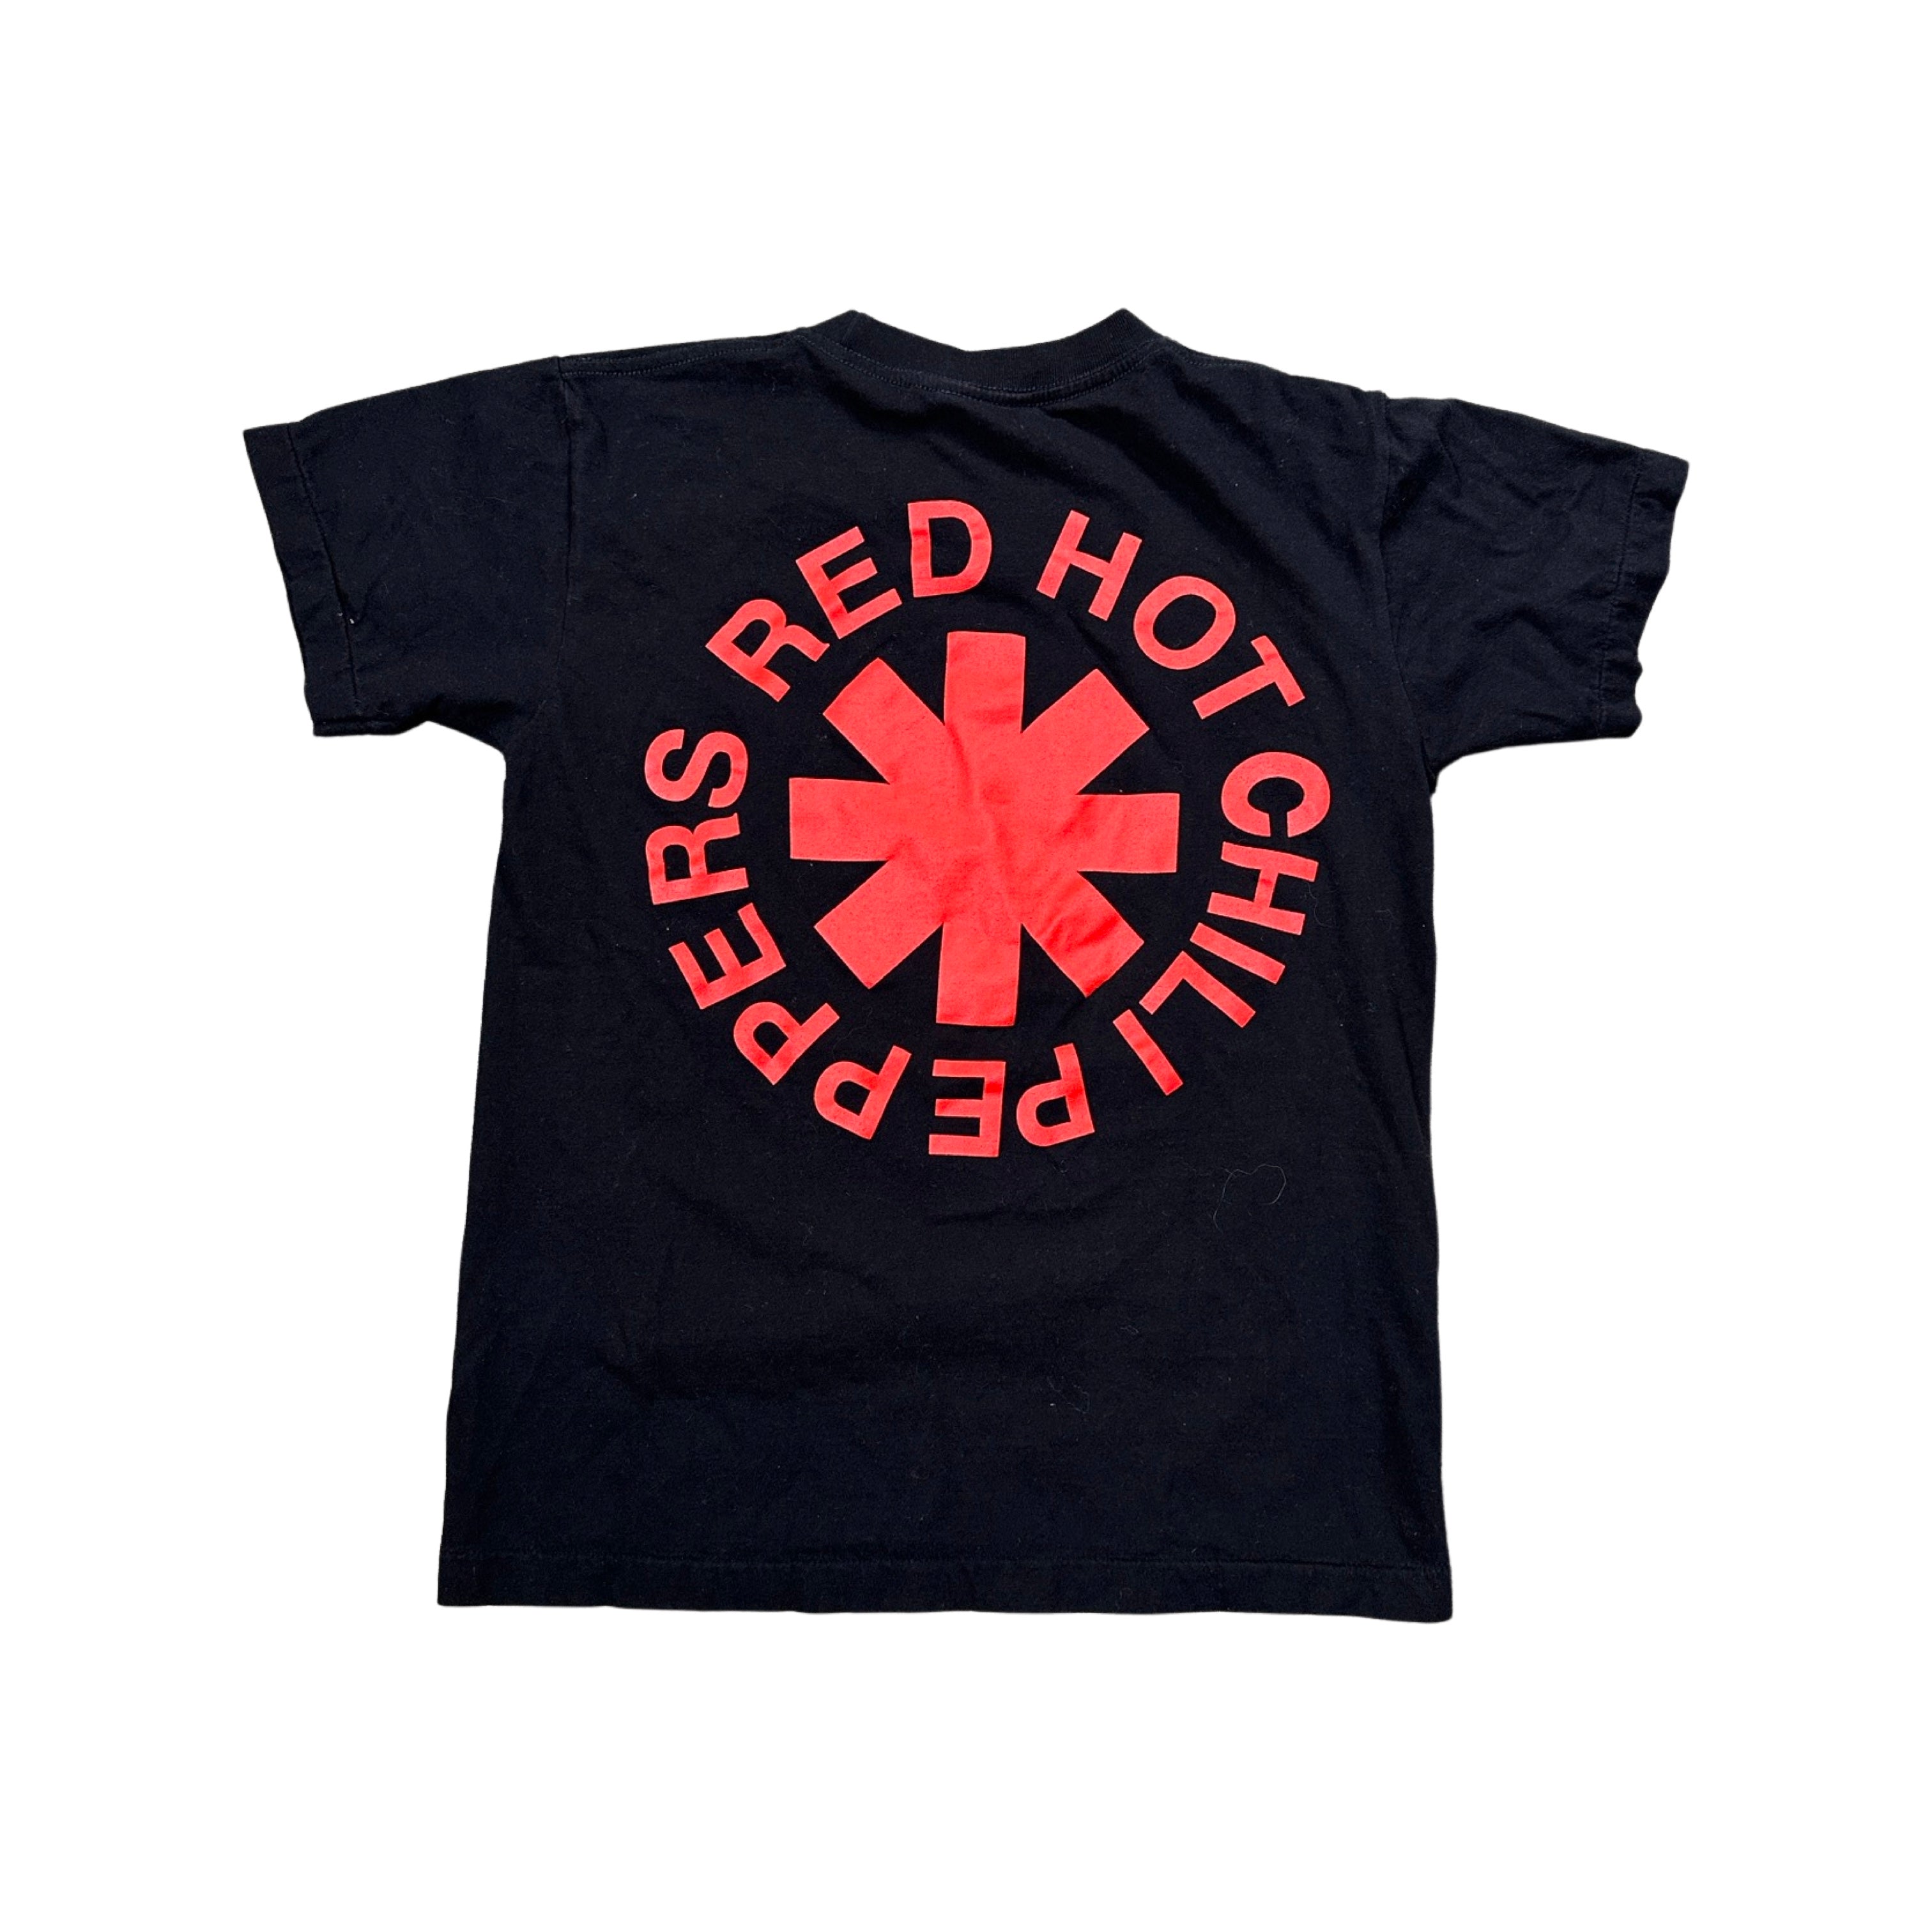 Red Hot Chili Peppers 90s T-Shirt Grail (Medium)